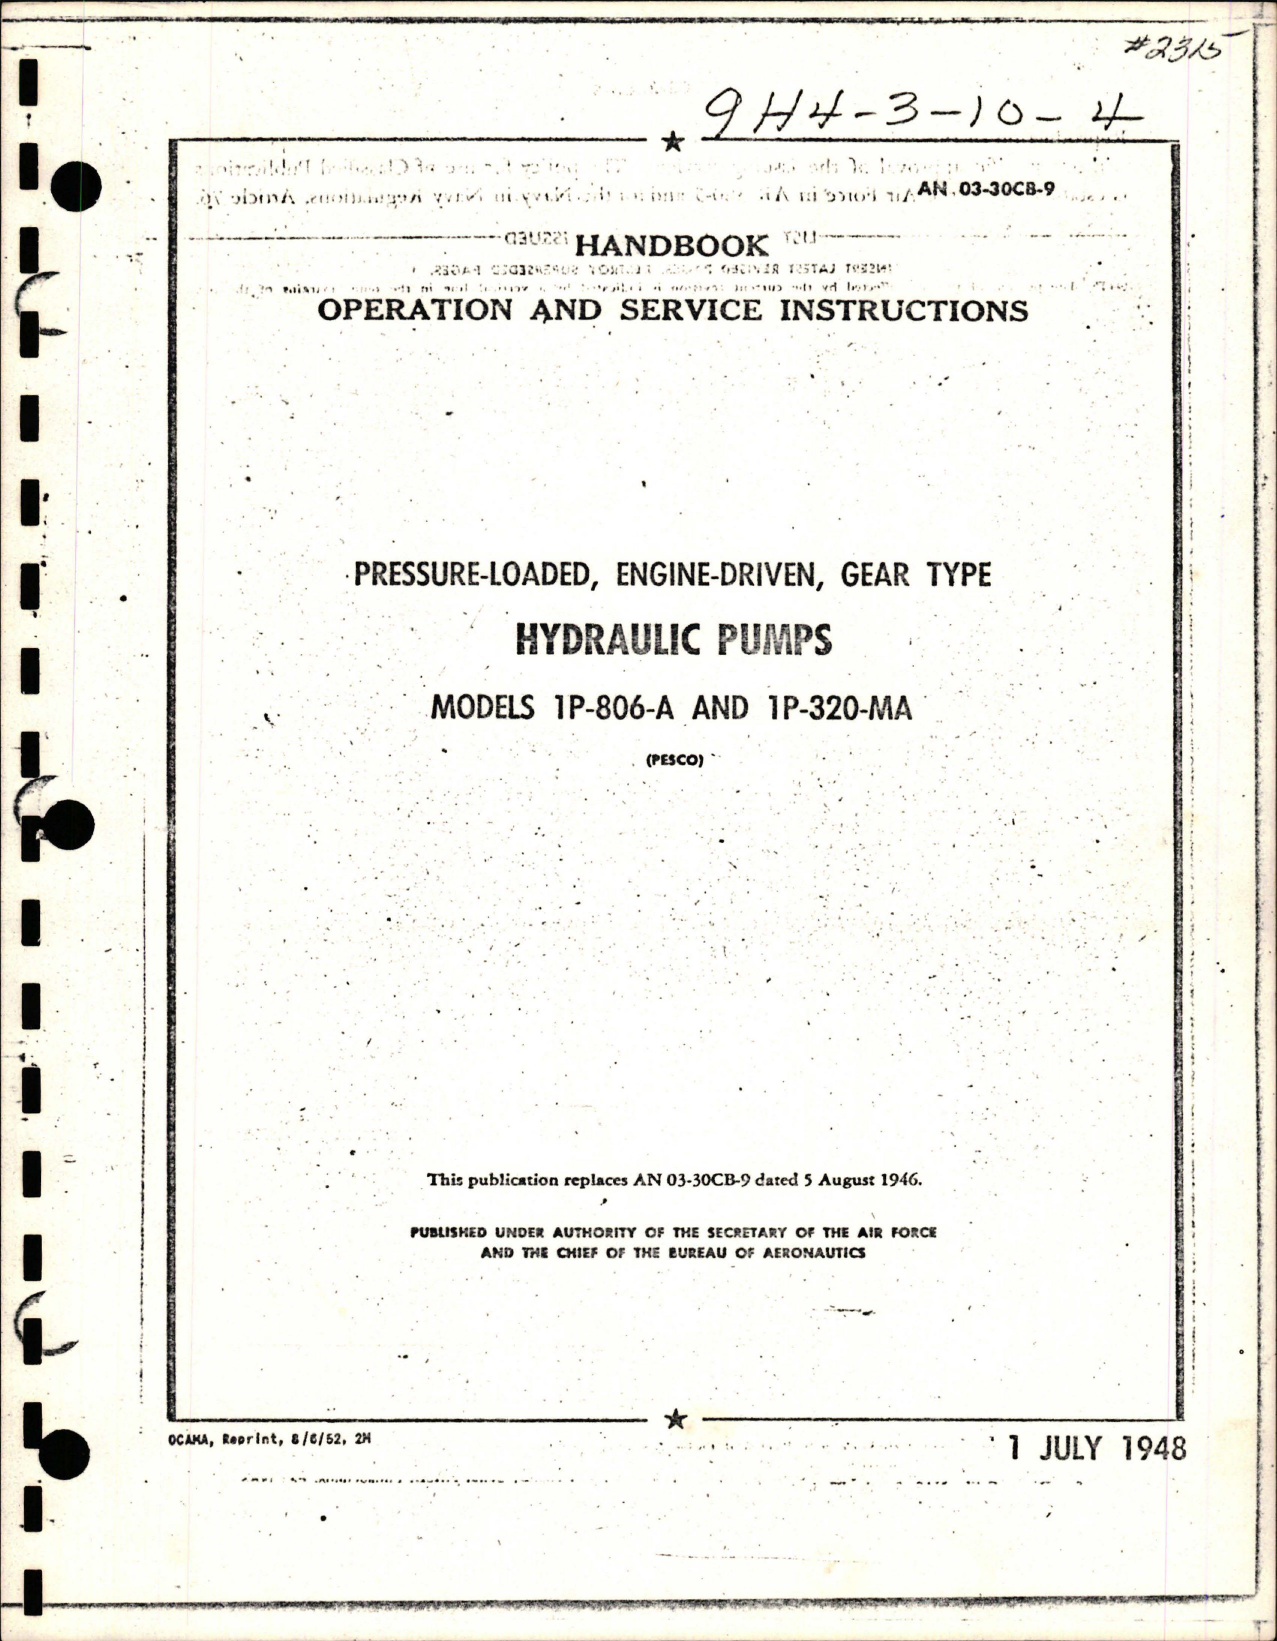 Sample page 1 from AirCorps Library document: Operation and Service Instructions for Pressure Loaded, Engine Driven, Gear Type Hydraulic Pumps - Models 1P-806-A and 1P-320-MA